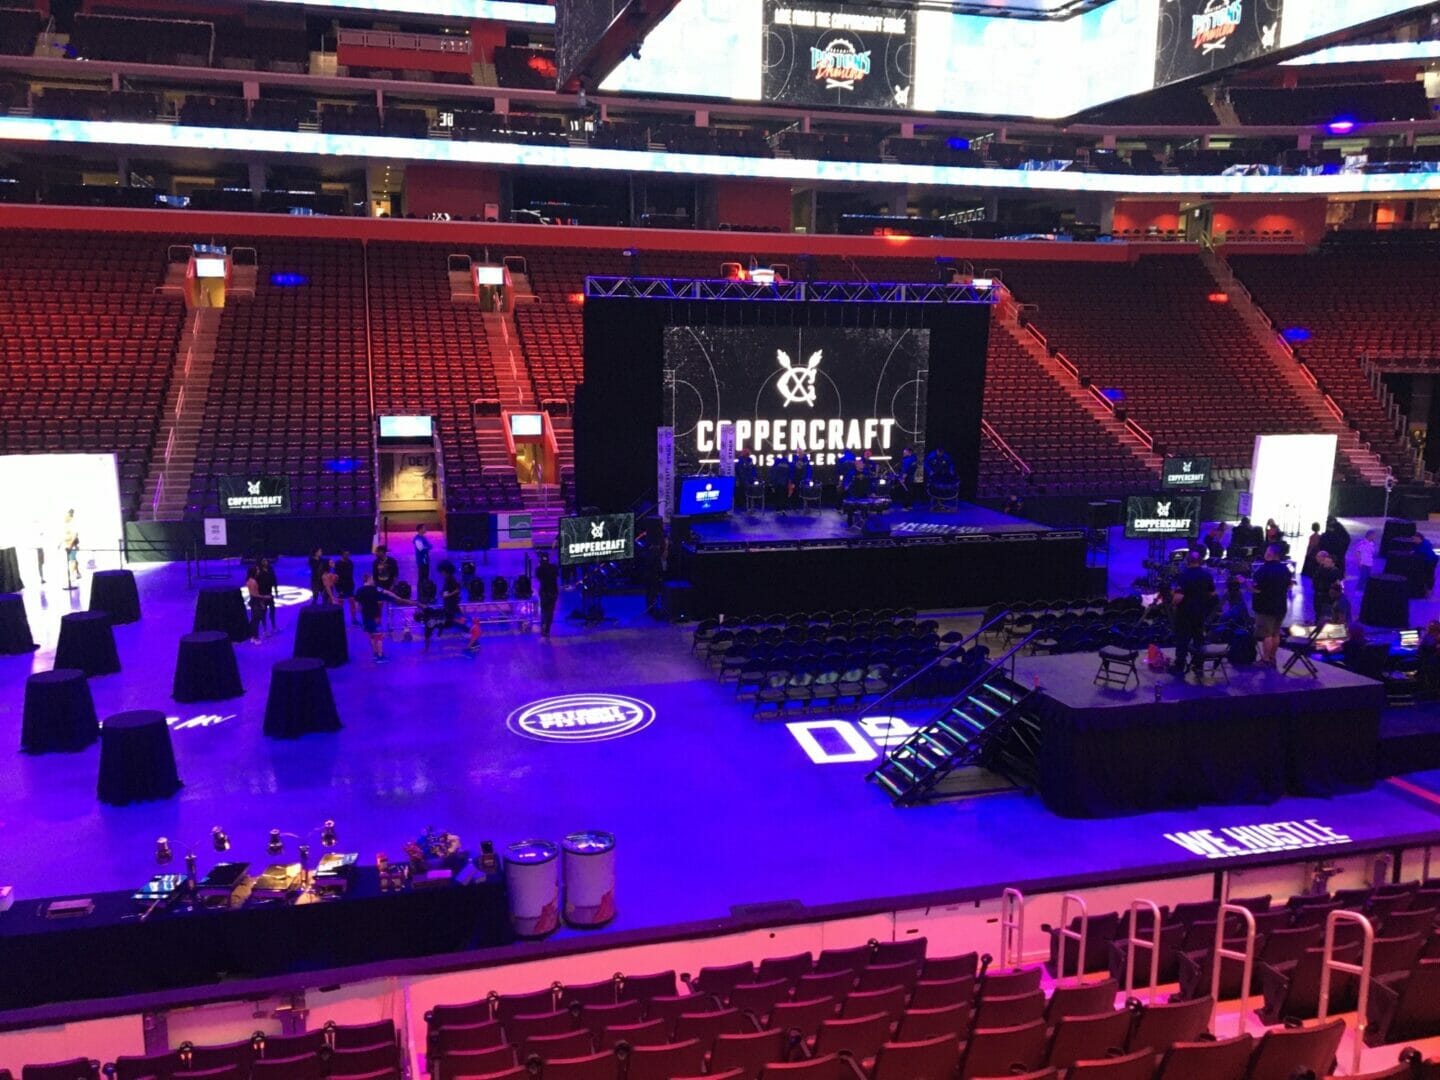 The Detroit Pistons Draft Party at Little Caesars Arena - Bluewater